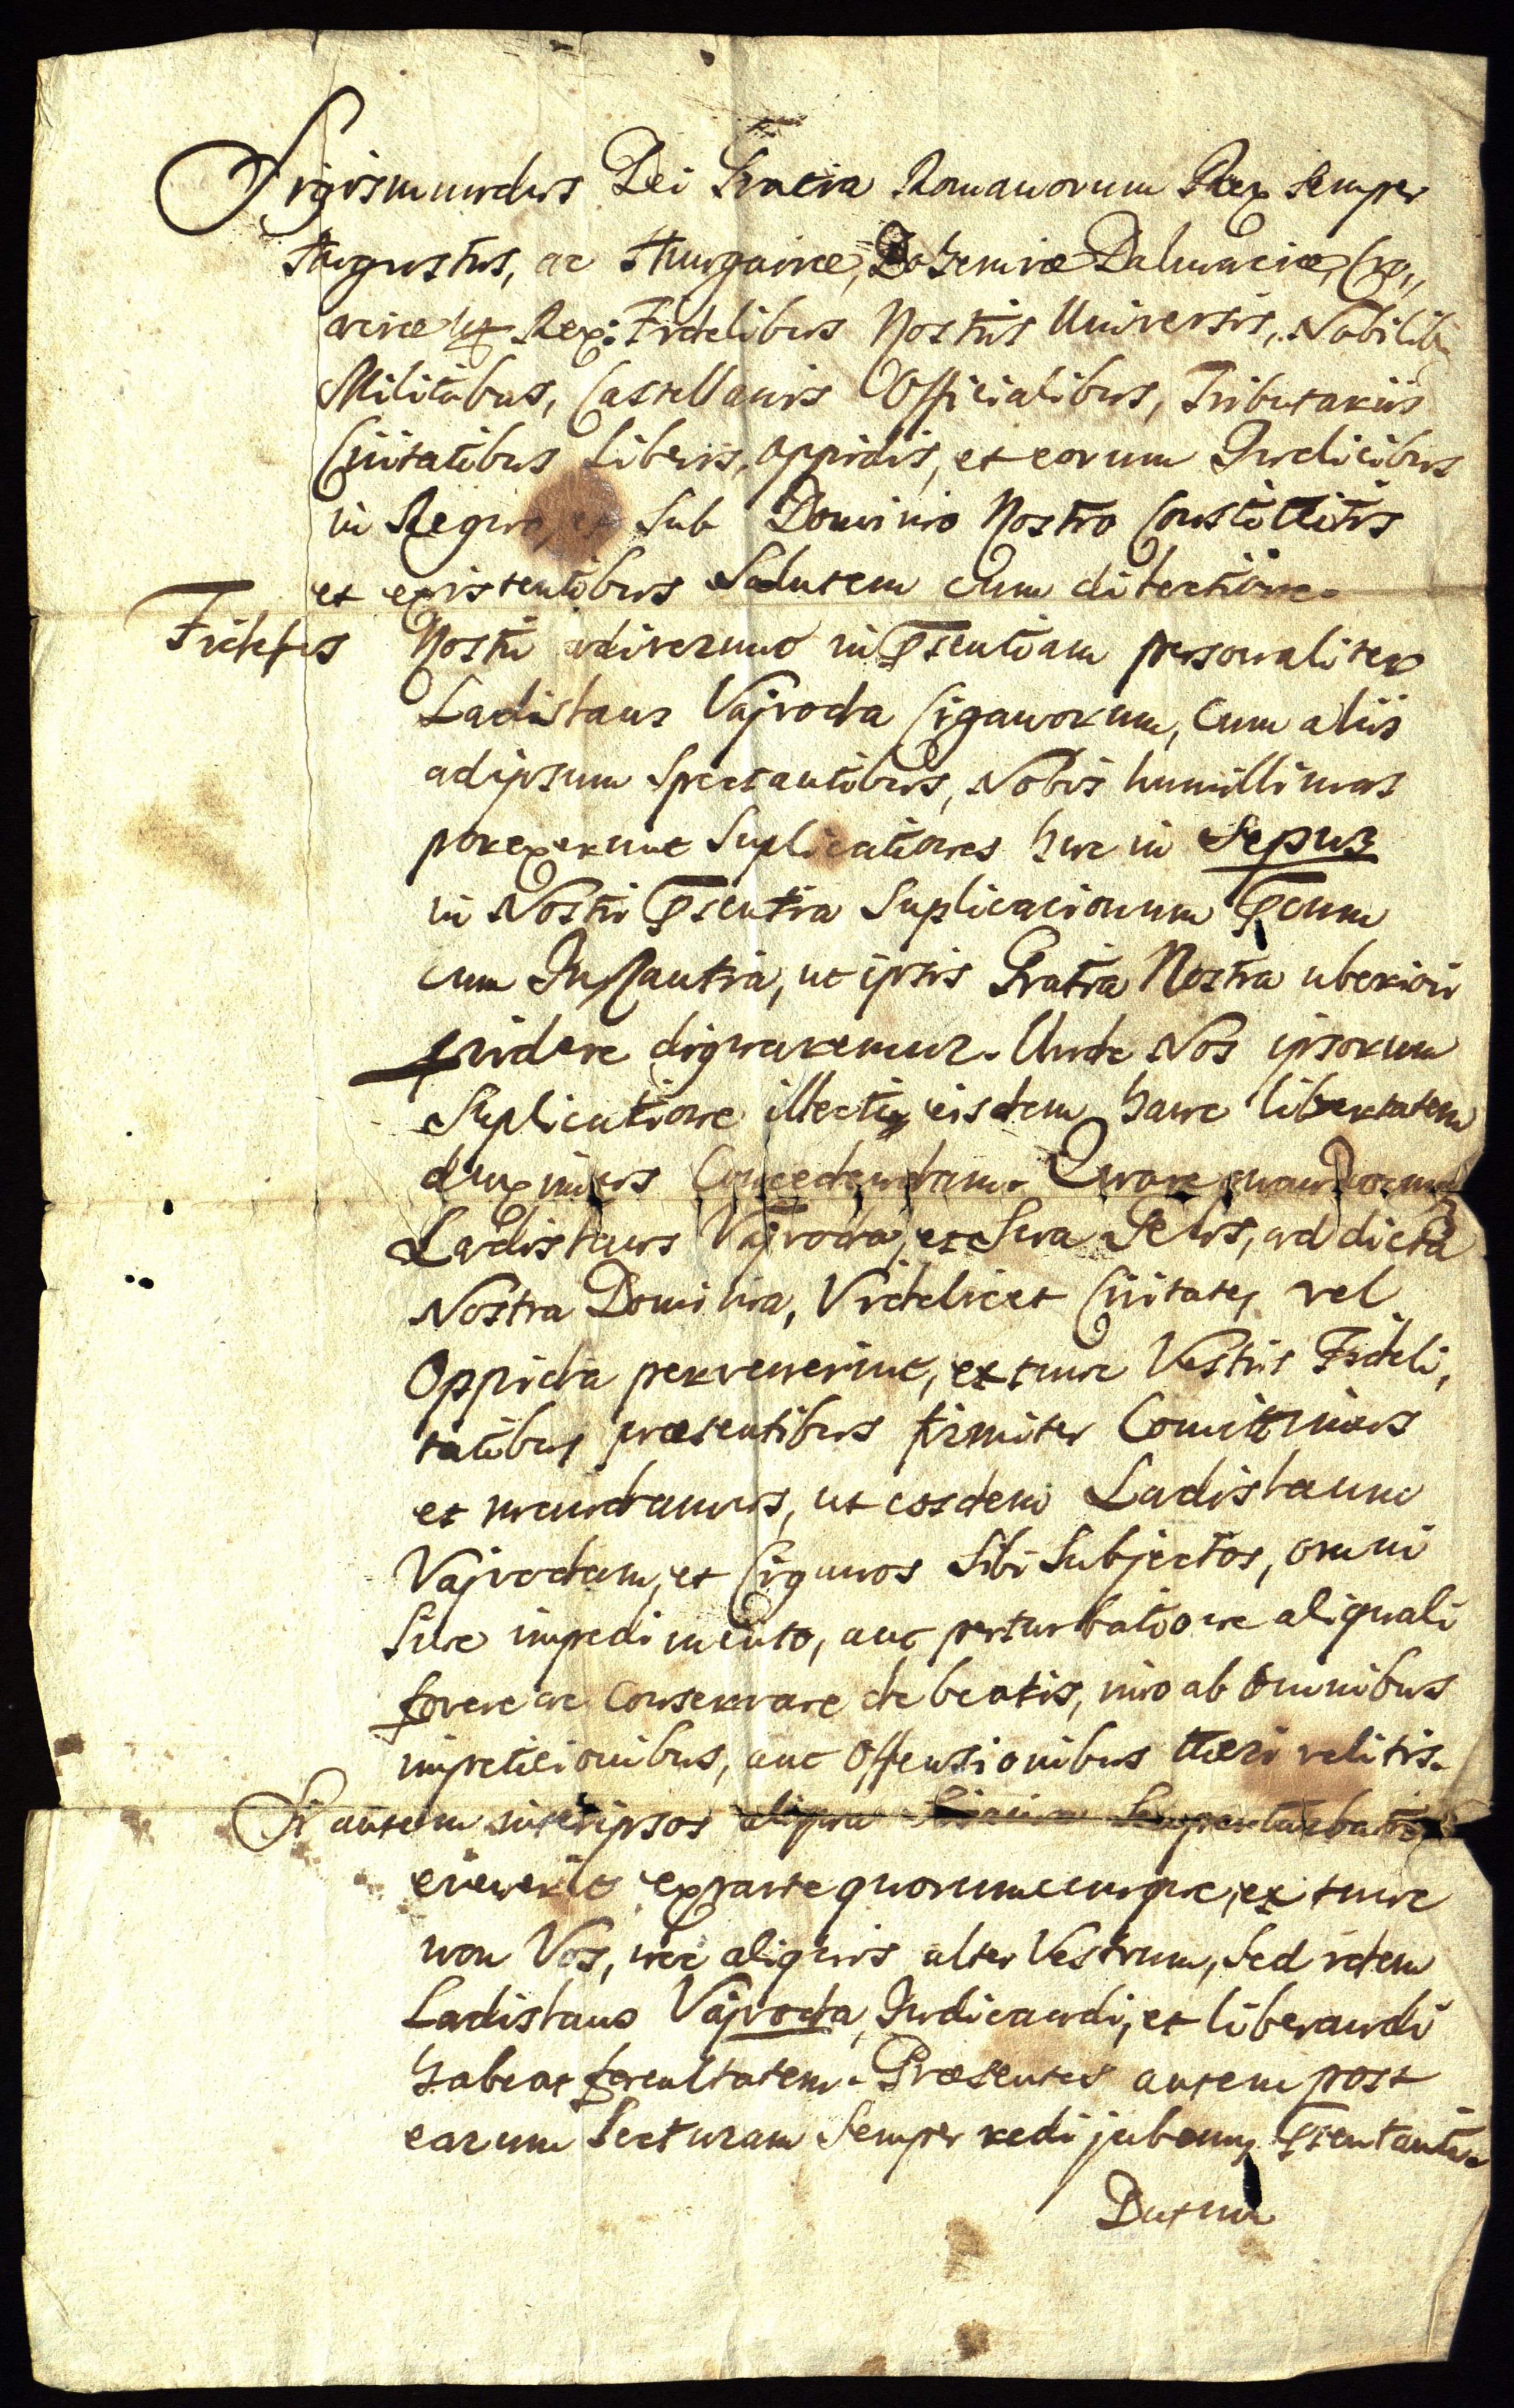 Magyar Nemzeti Levéltár, An 18th C. transcript of the document issued by Sigismund on the 18th April 1423 - recto (Reference code: HU MNL OL DL 107246)
